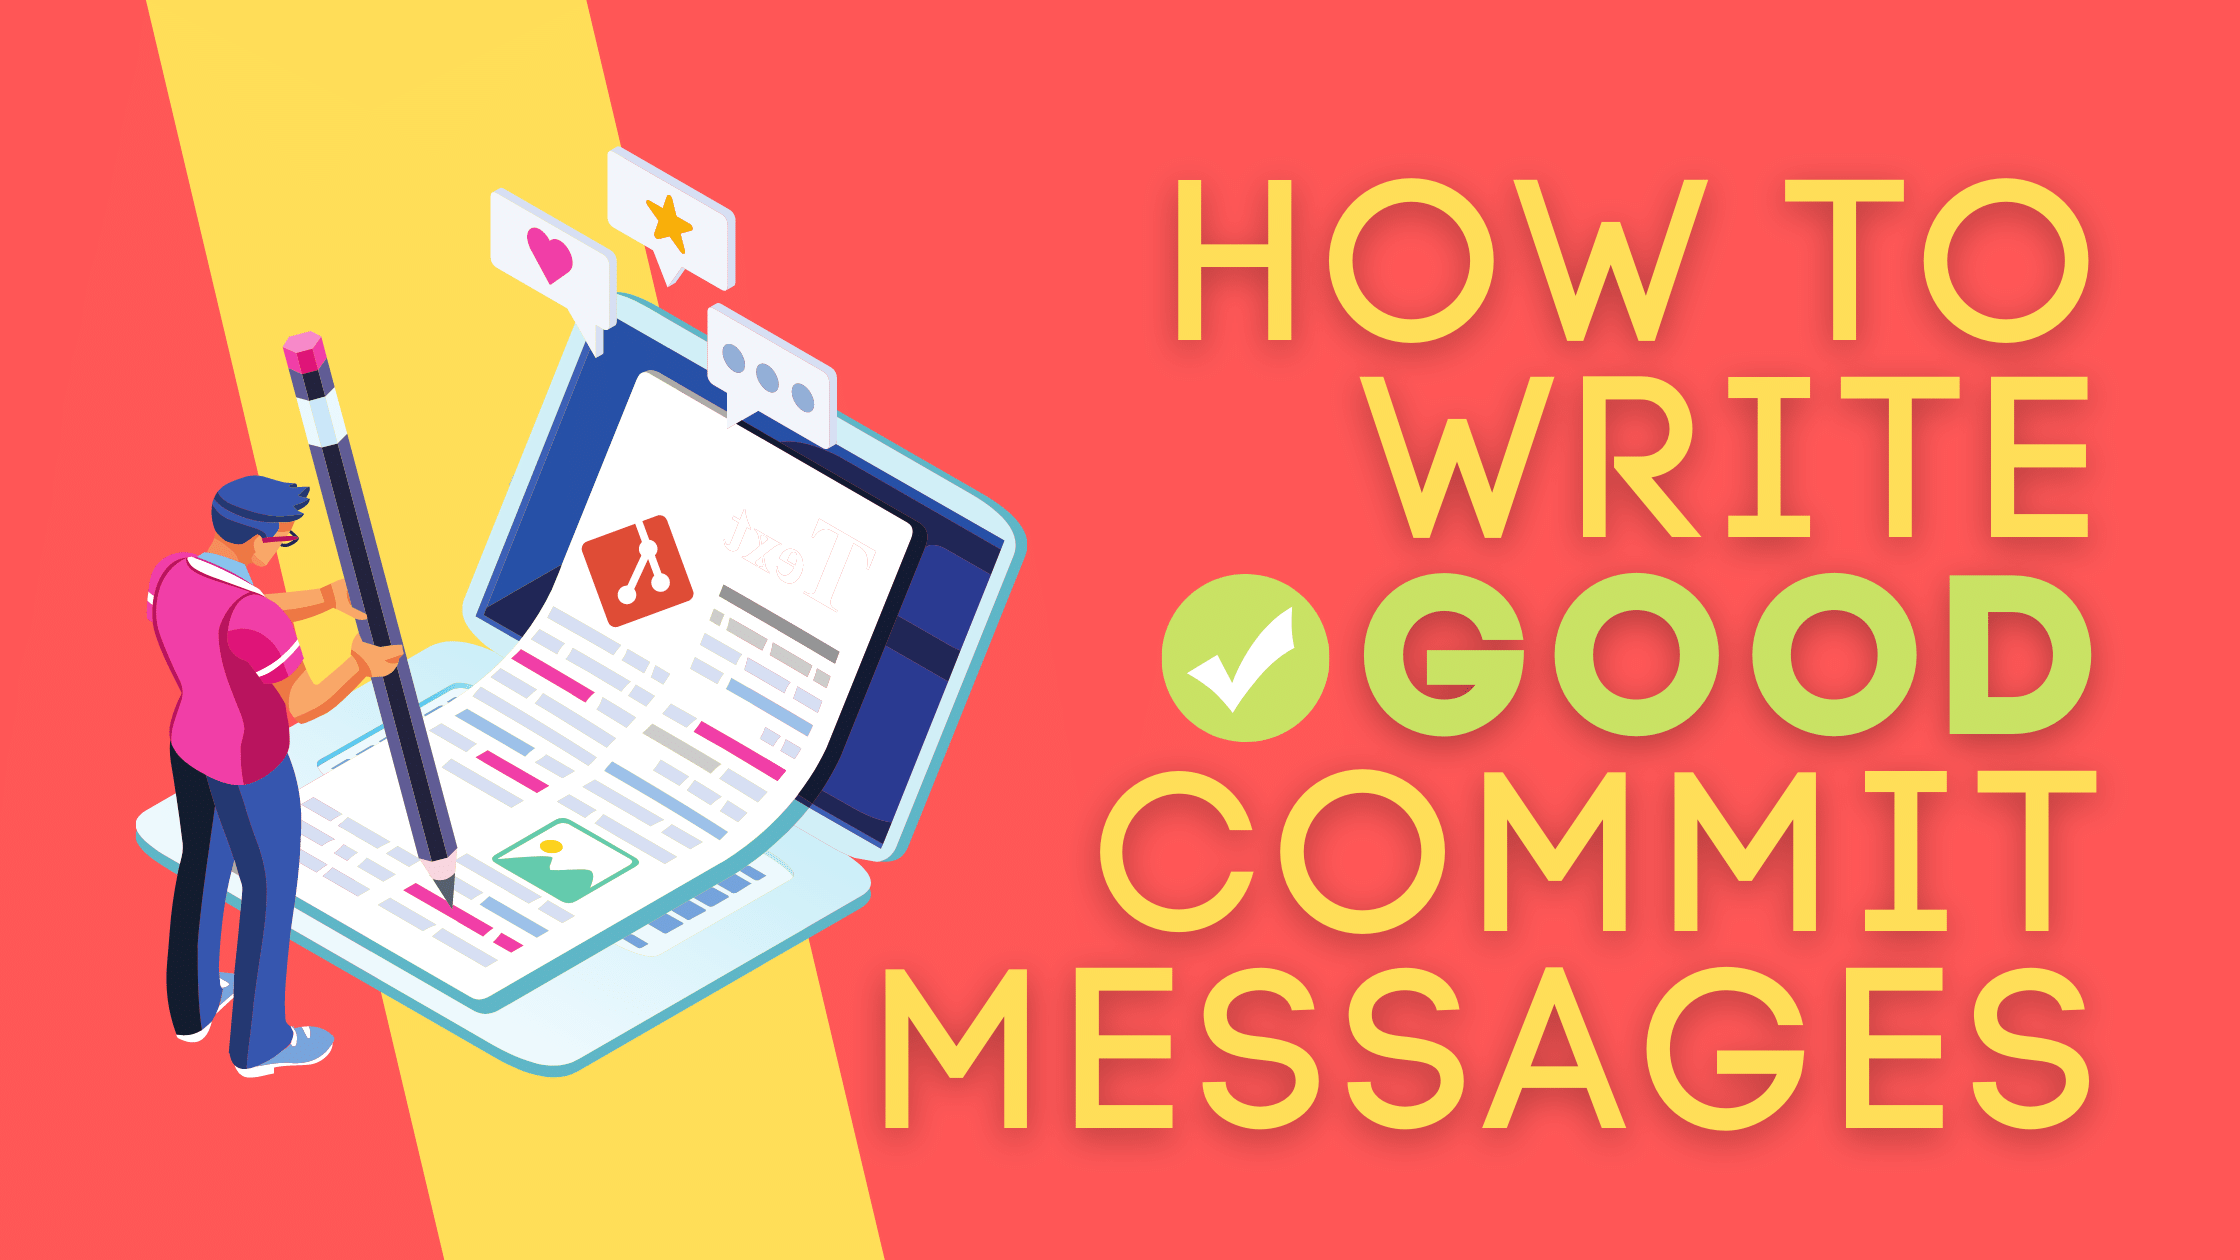 How To Write Good Commit Messages